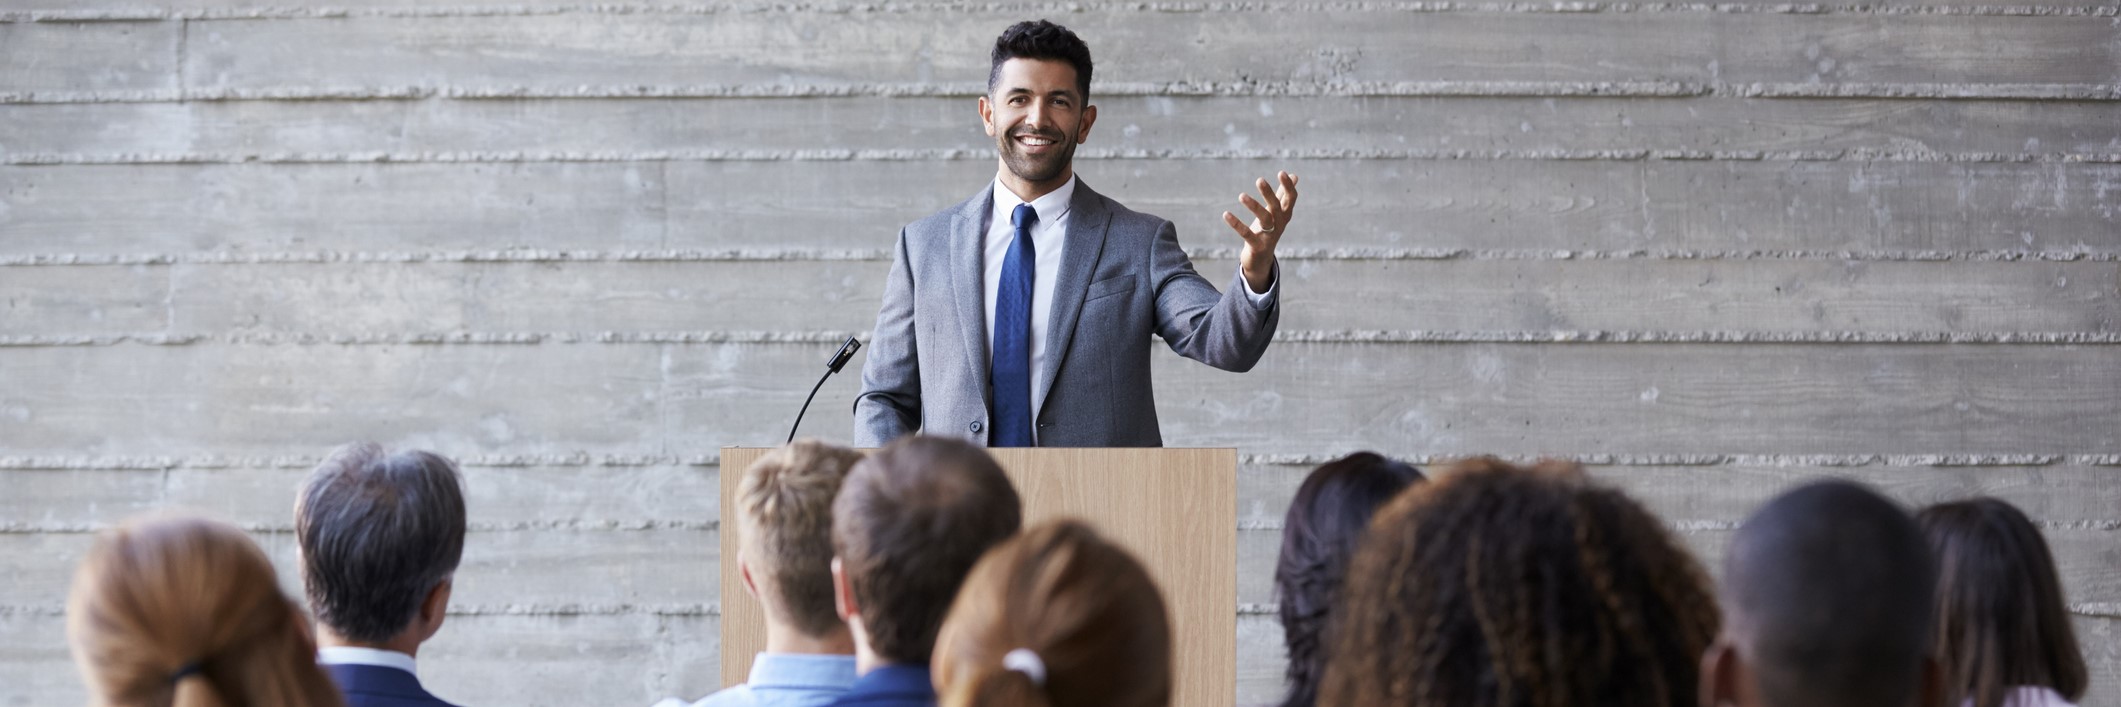 Man presenting from behind a podium